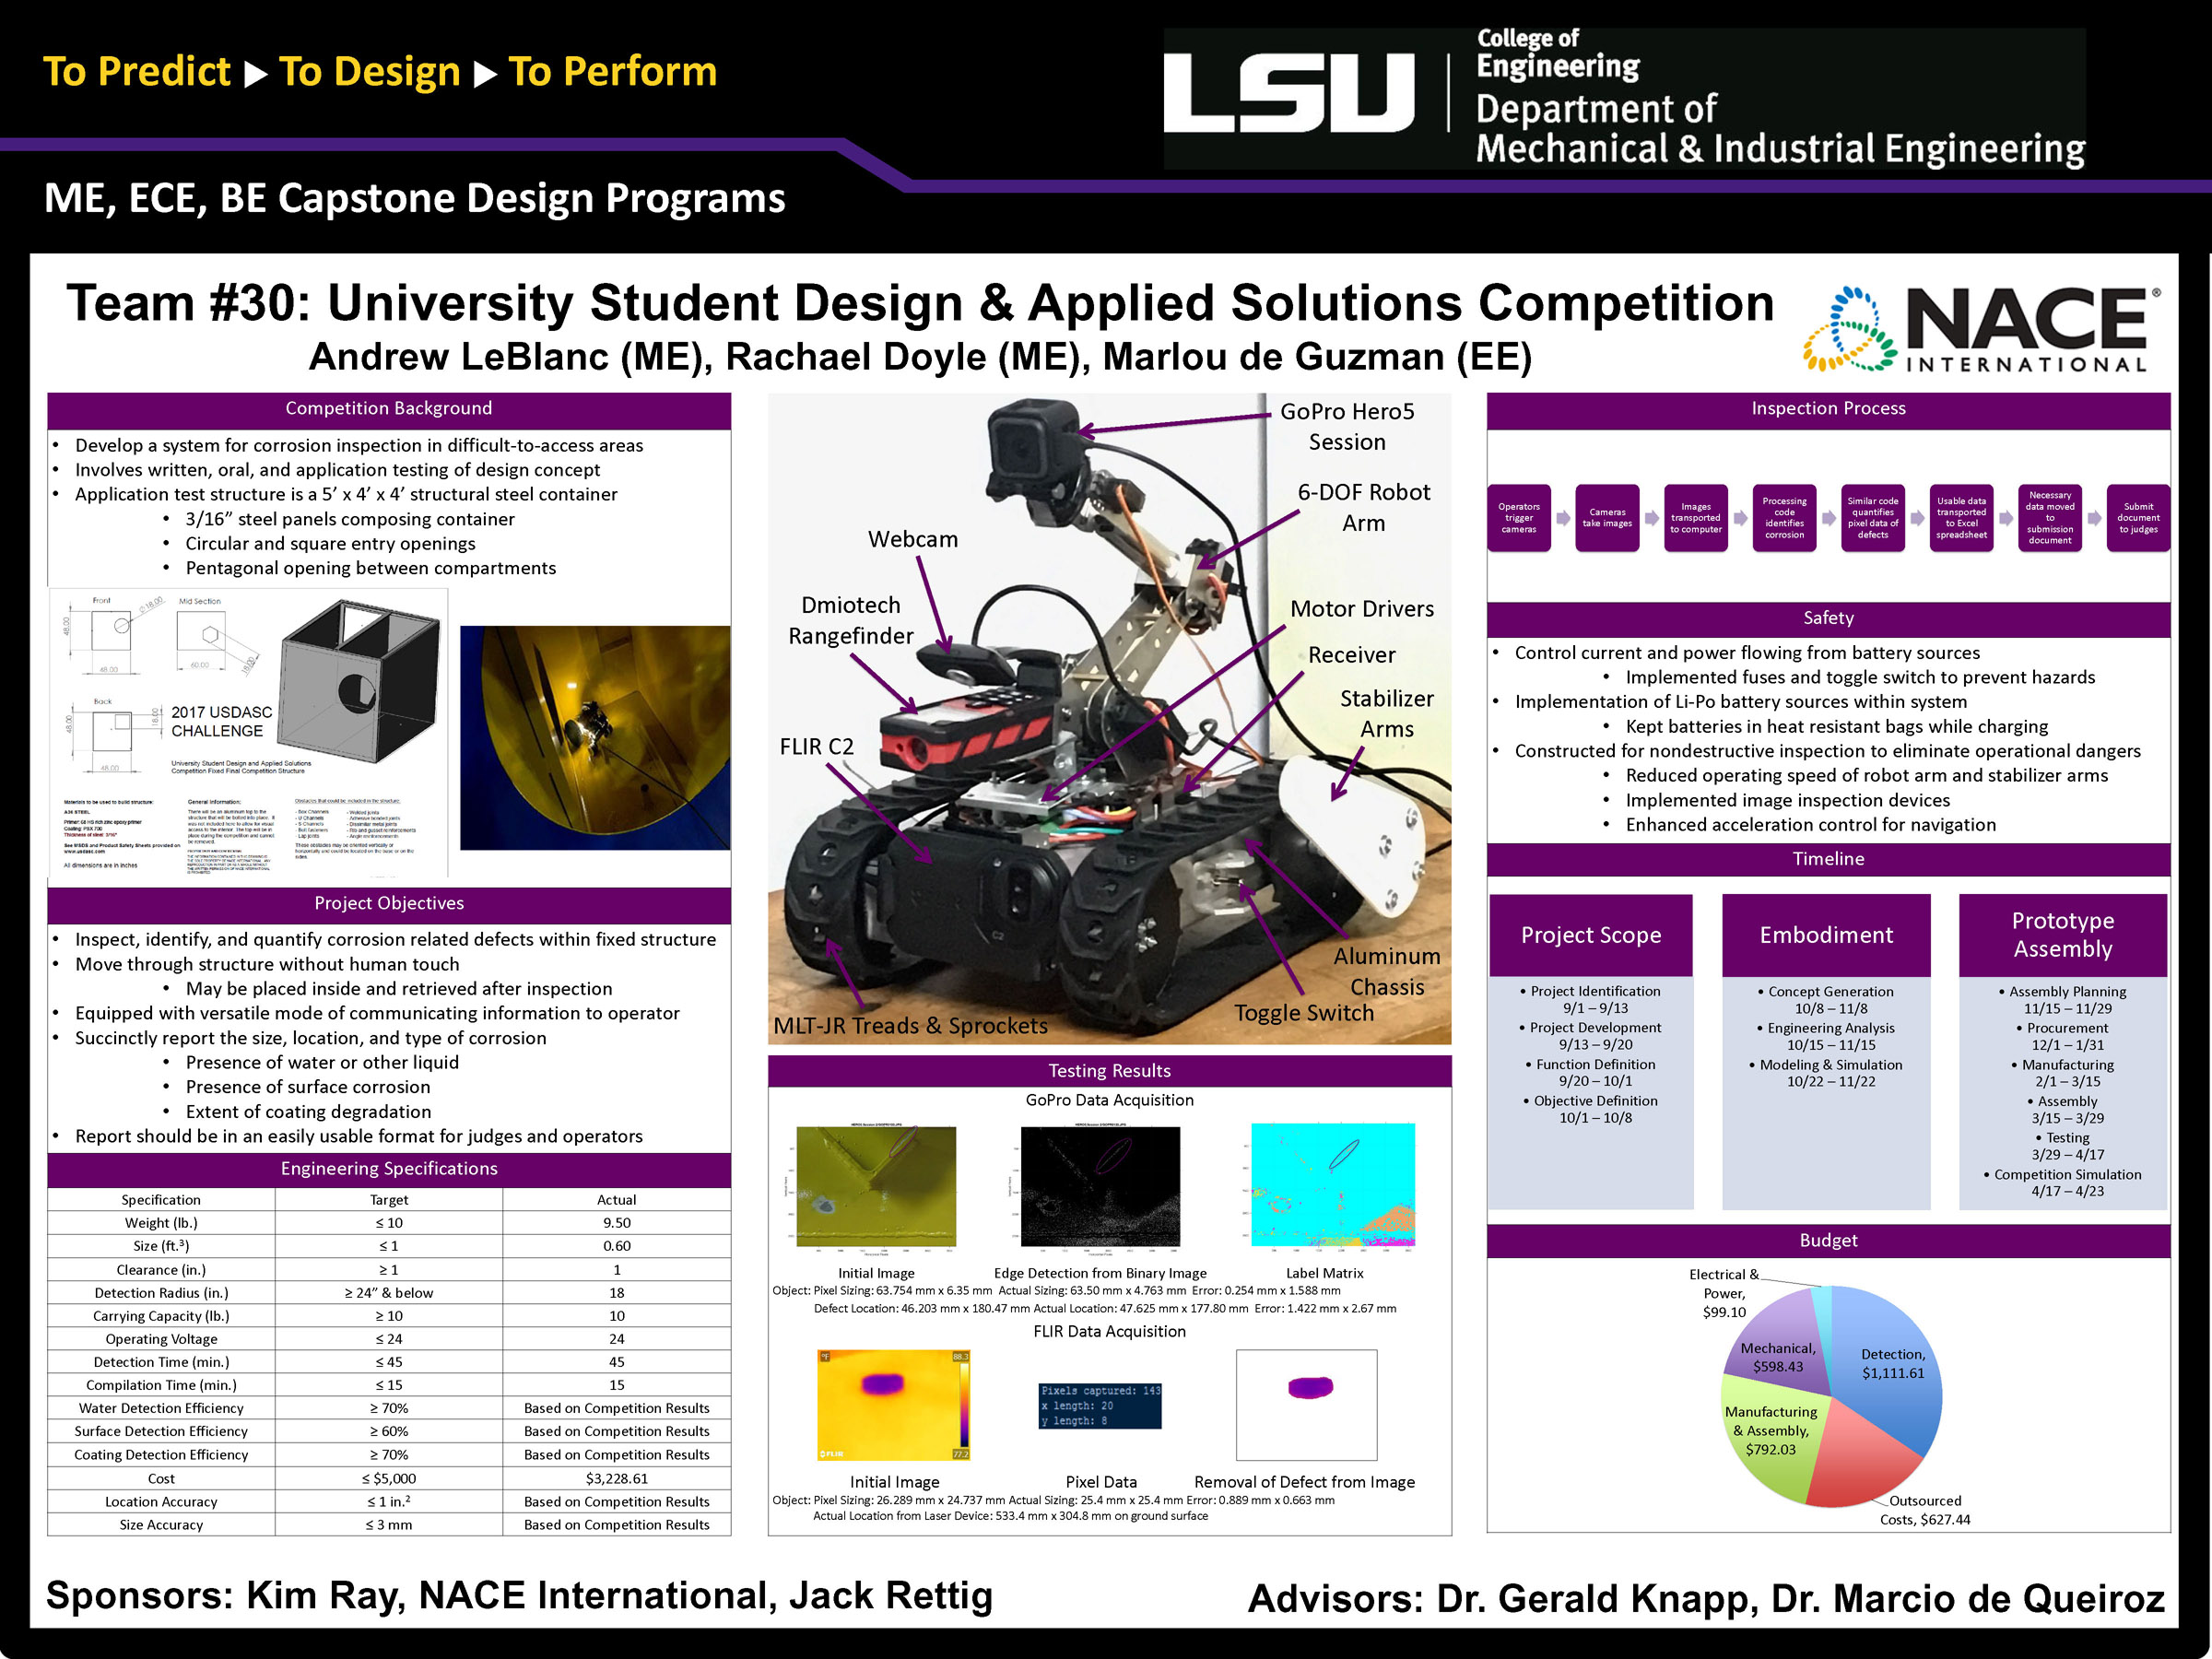 Project 30: University Student Design and Applied Solutions Competition (2017)